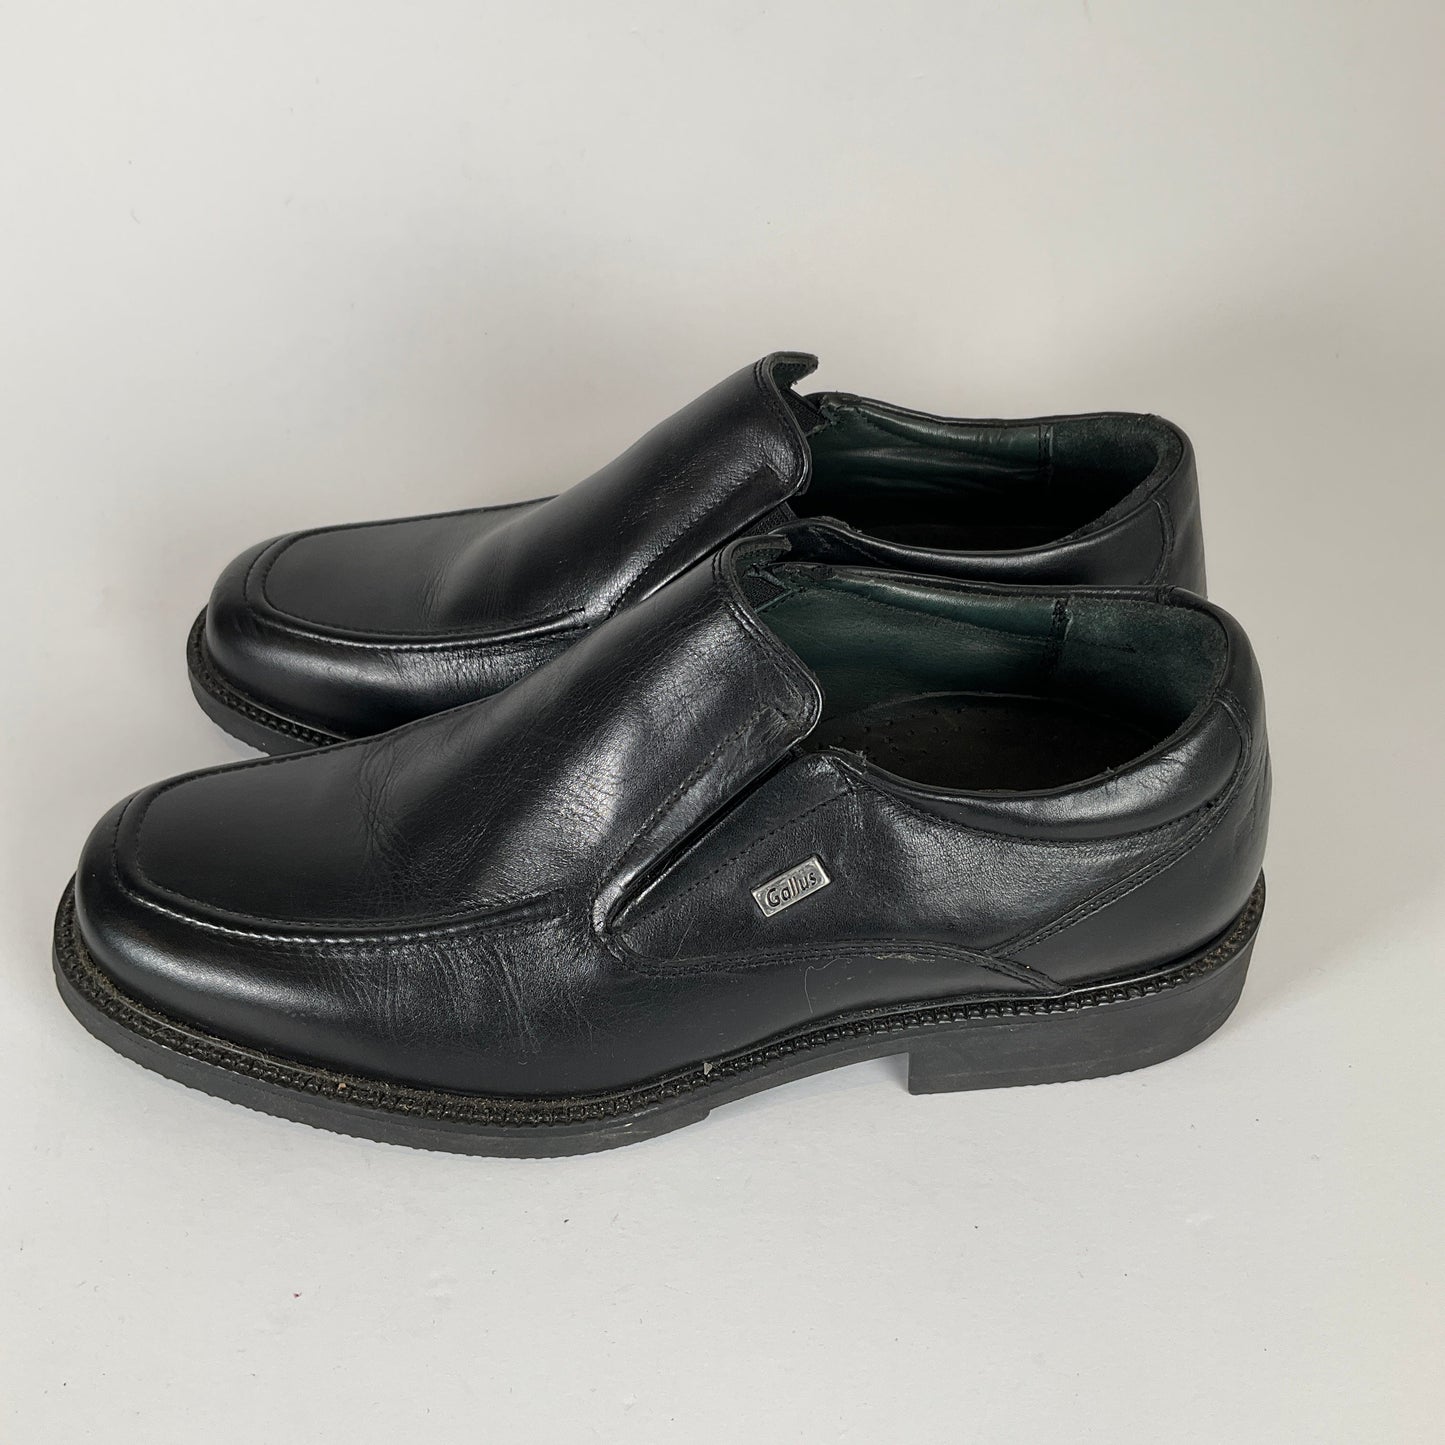 Gallus - Casual Black Shoes Size 6.5